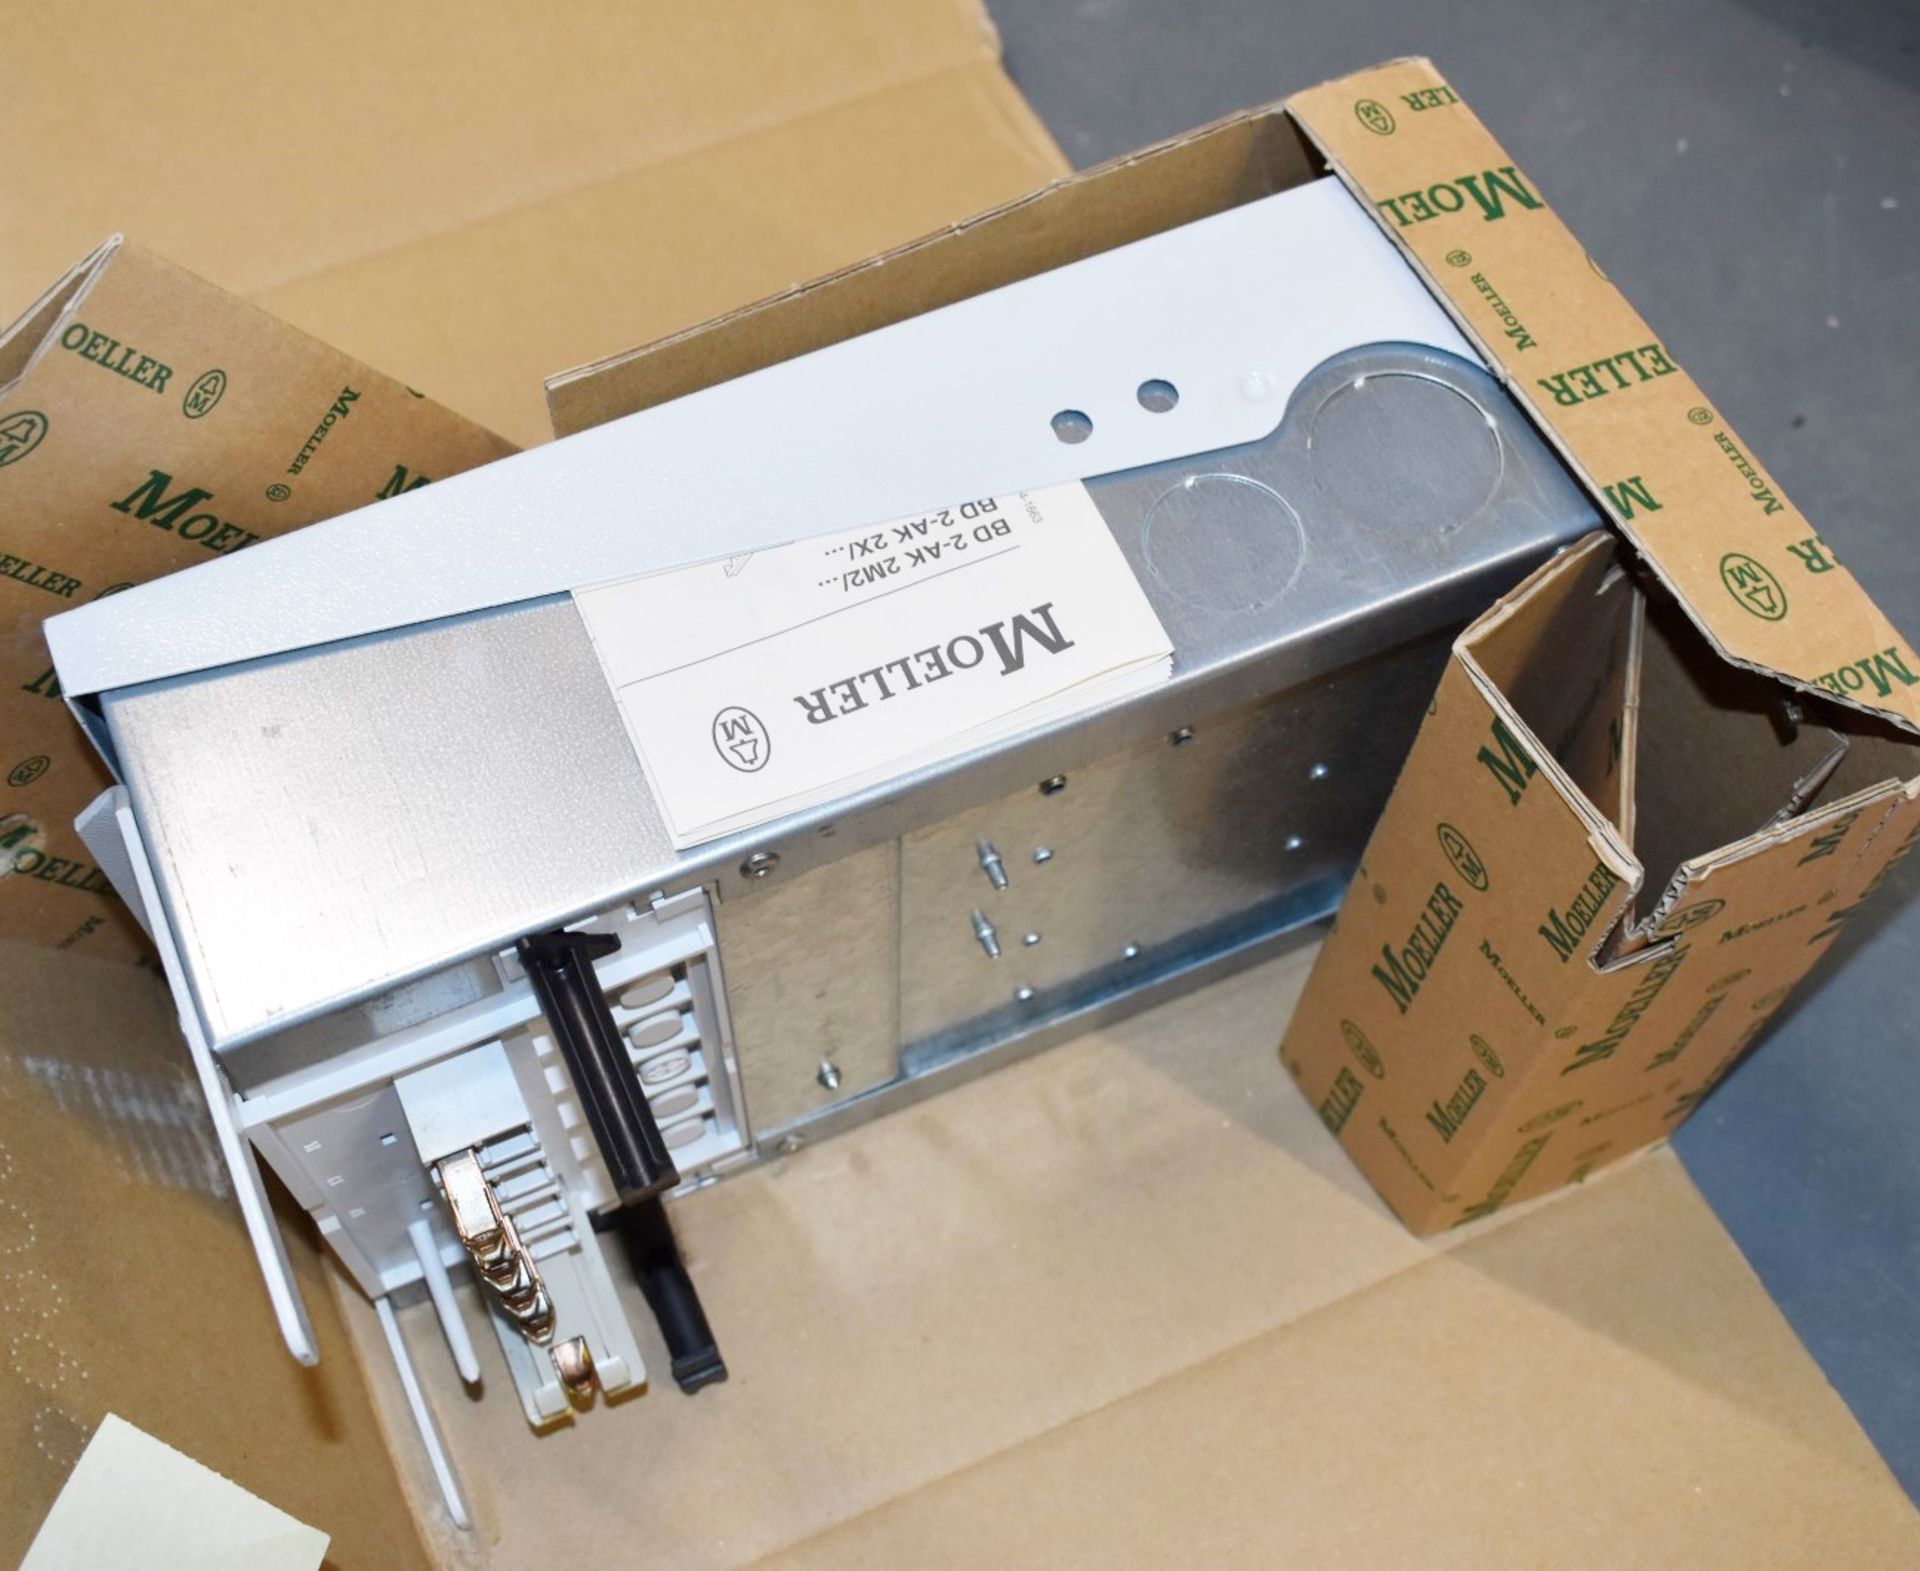 1 x Moeller Tap Off Unit For Busway Trunk - 25A BD2-AK2X/S27 - Unused in Original Box - Image 2 of 4